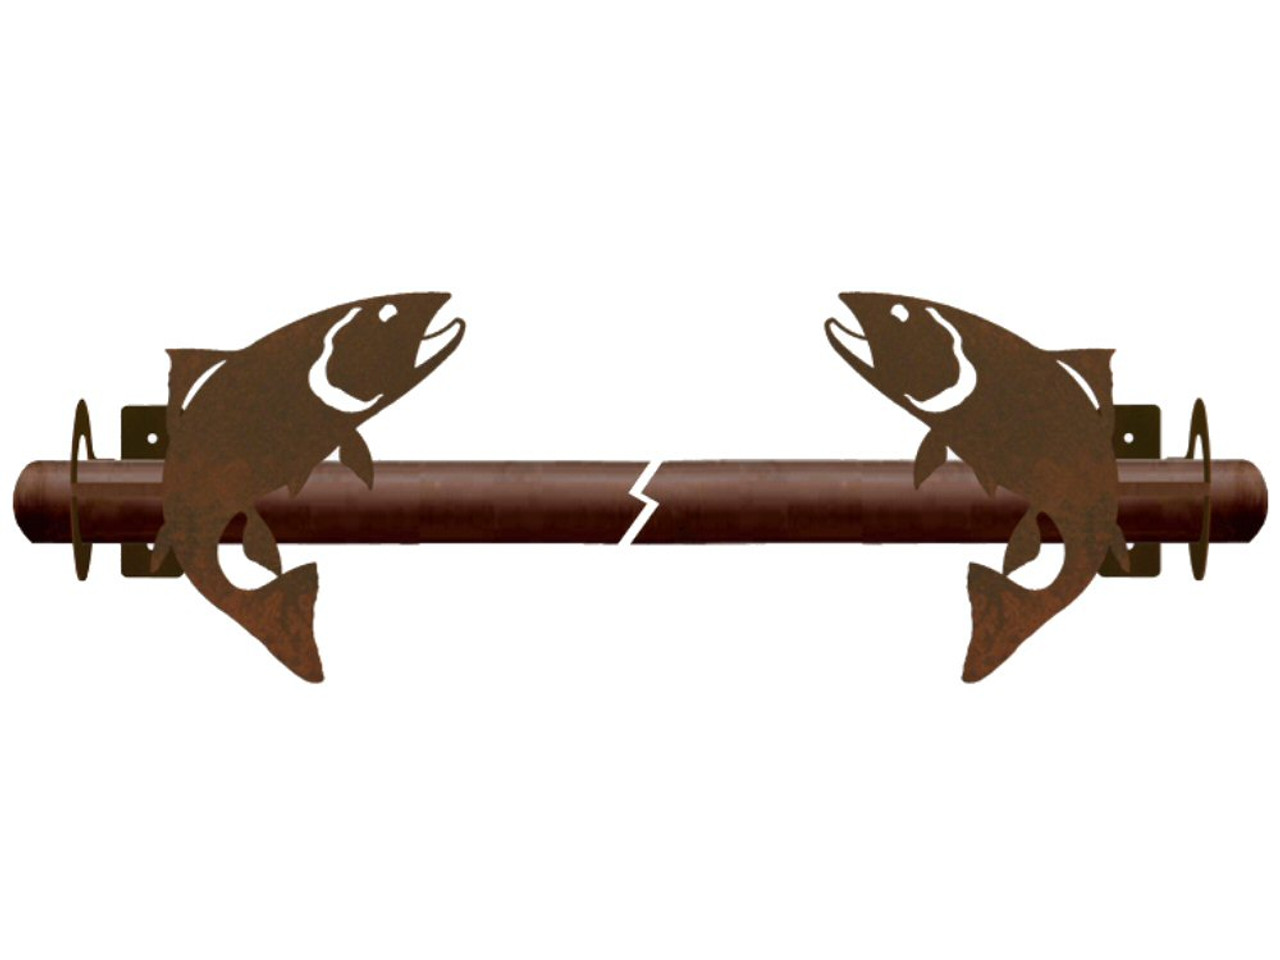 Trout Fish Metal Curtain Rod Holders - Rustic Curtain Accessories